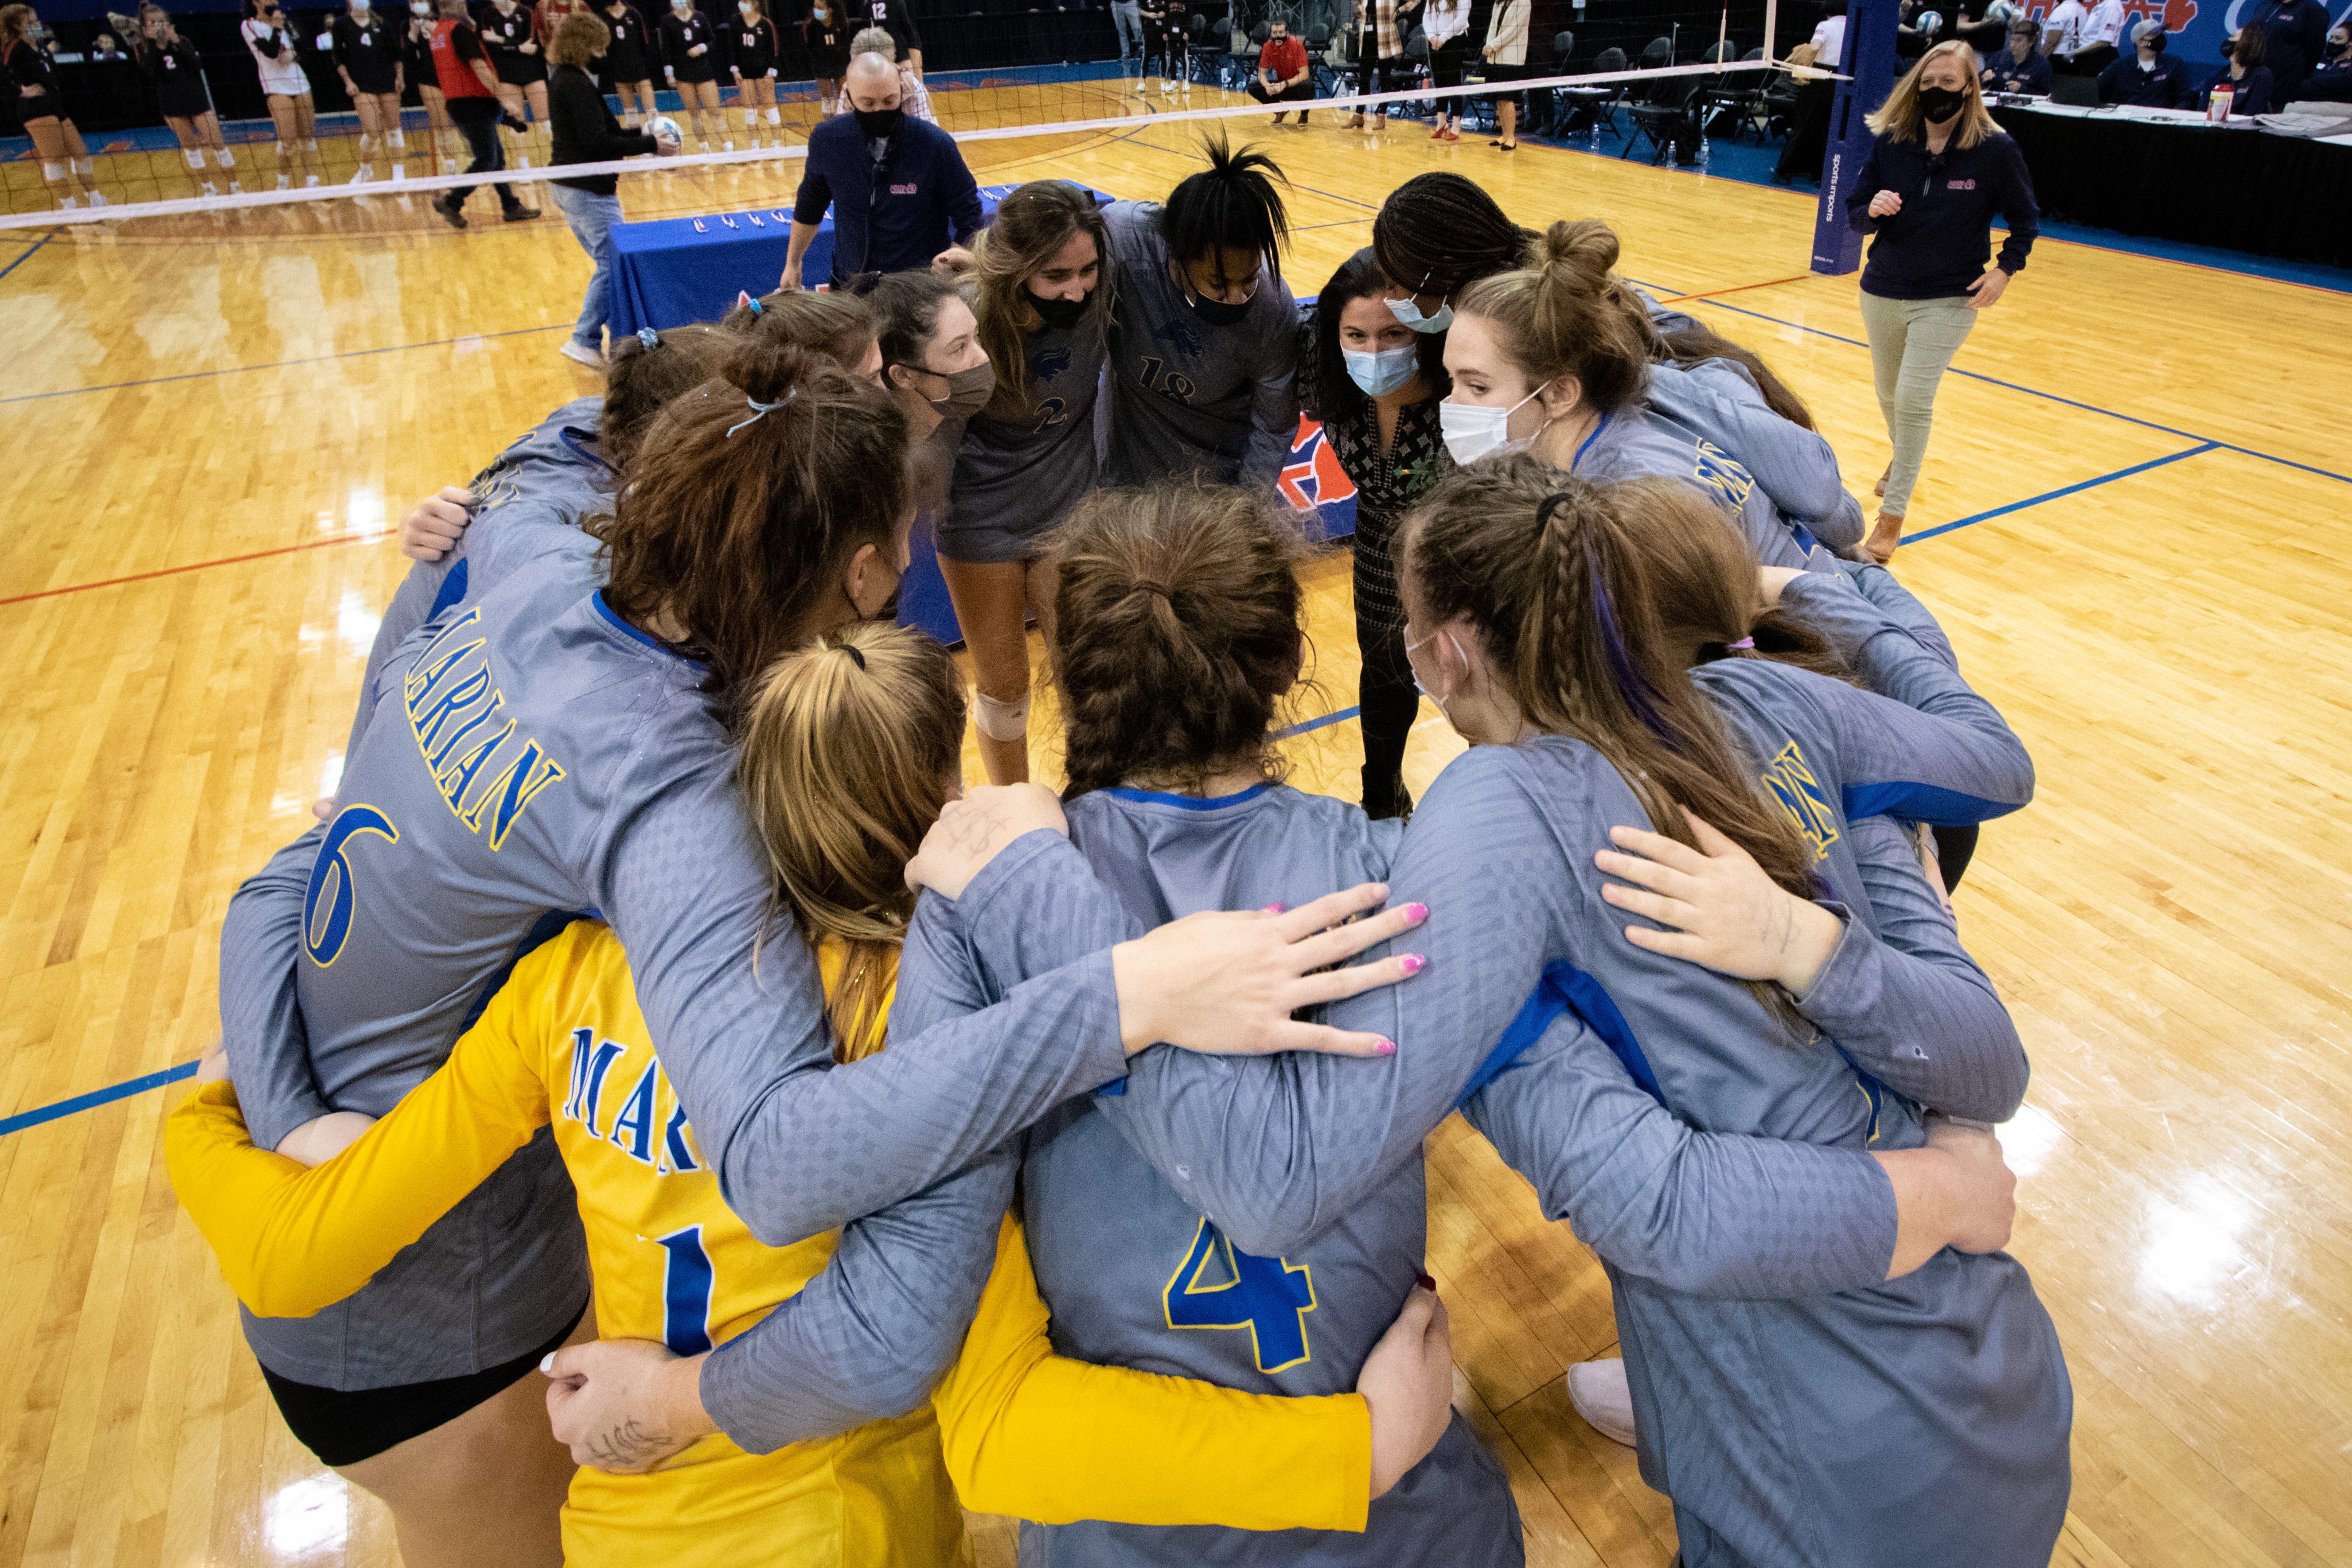 Birmingham Marian huddles together after defeating Lowell to win the Division 1 state volleyball championship on Saturday, January 16, 2021 at Kellogg Arena in Battle Creek.